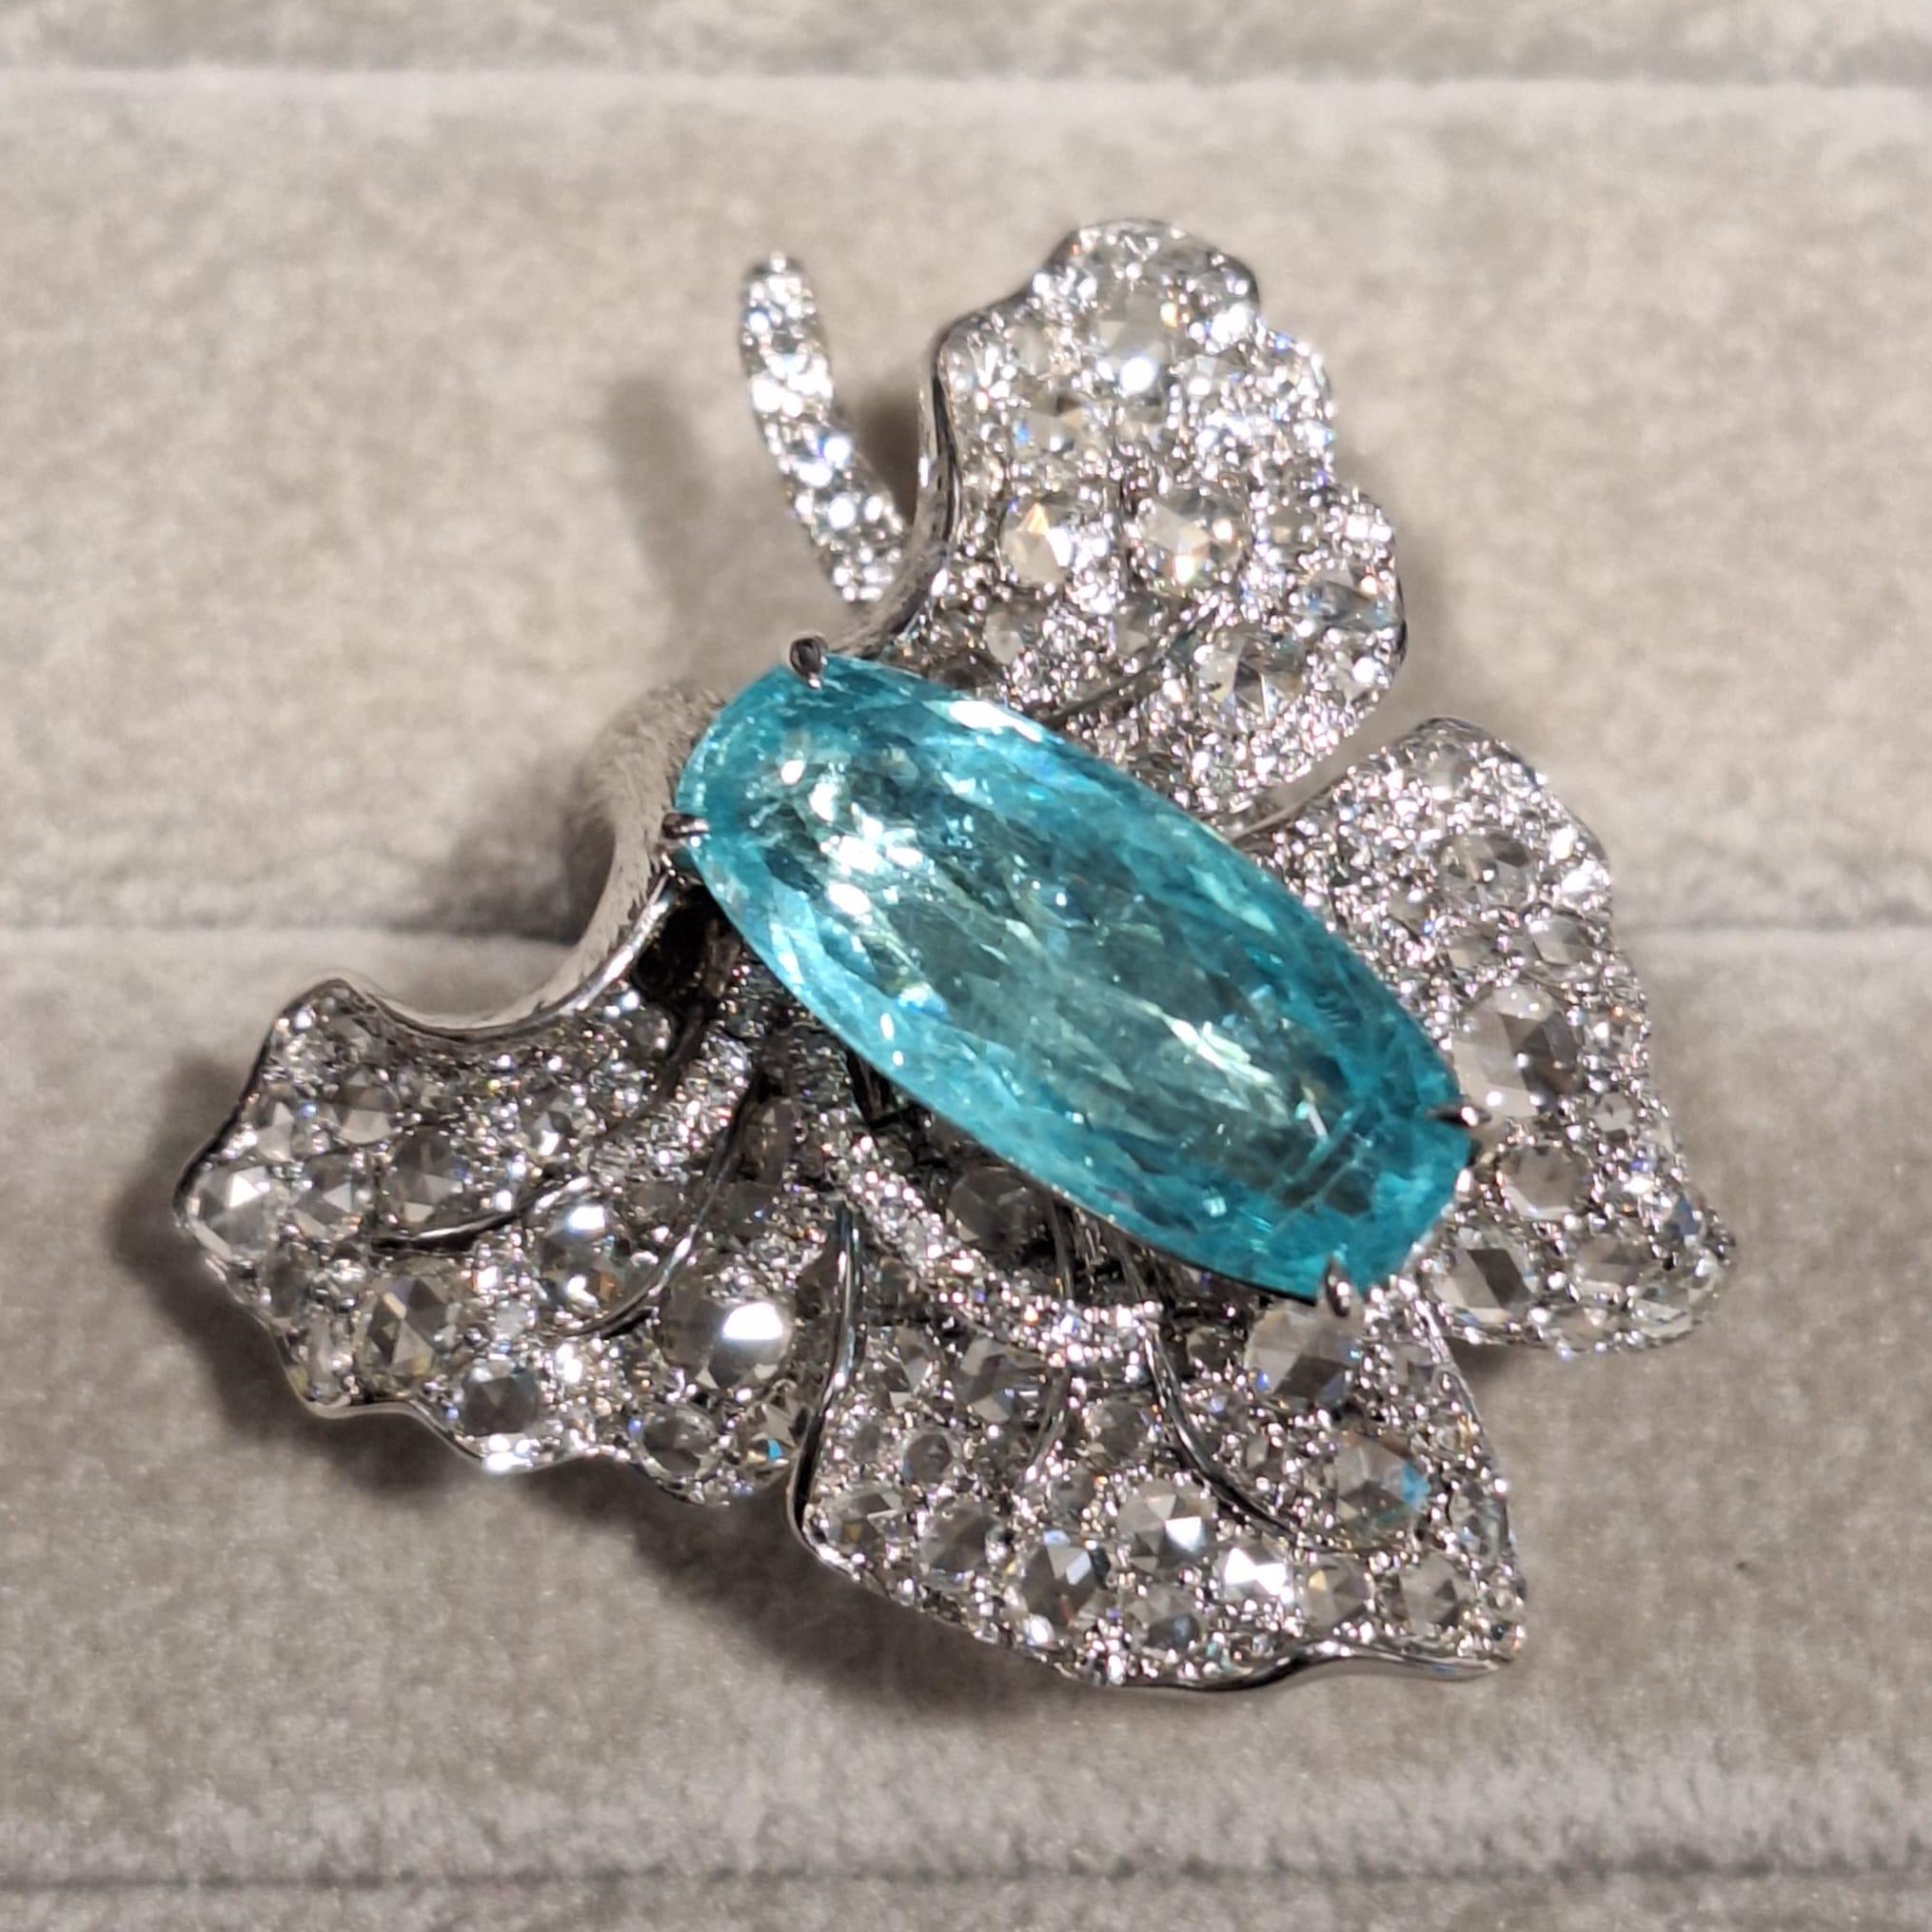 18K White Gold Diamond Ring with Paraiba

Paraiba Tourmaline makes an effective healing stone that brings hope, joy and luck. Provides greater mental clarity and tranquility.

Diamonds symbolise clarity and purity, also represent innocence,